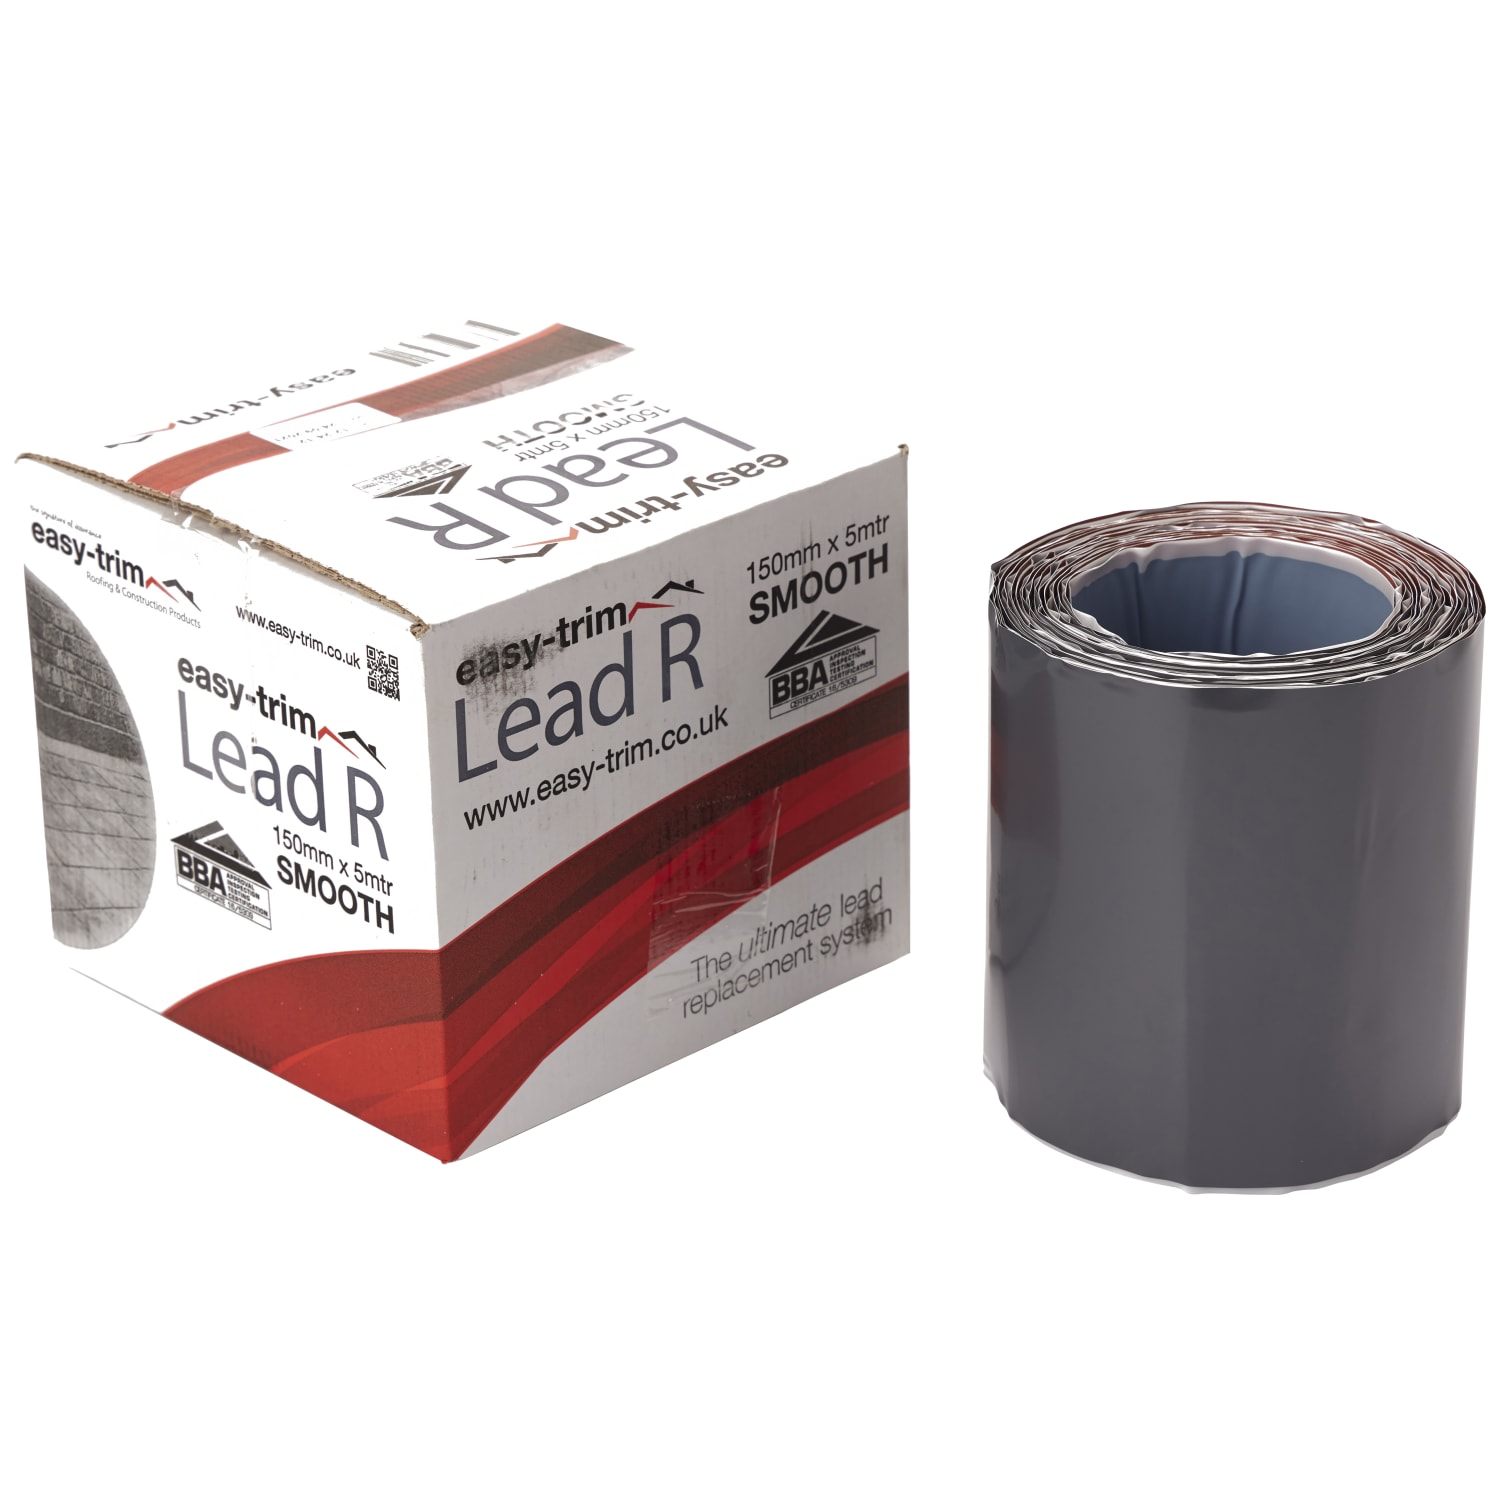 Lead R Smooth 150mm x Wickes.co.uk